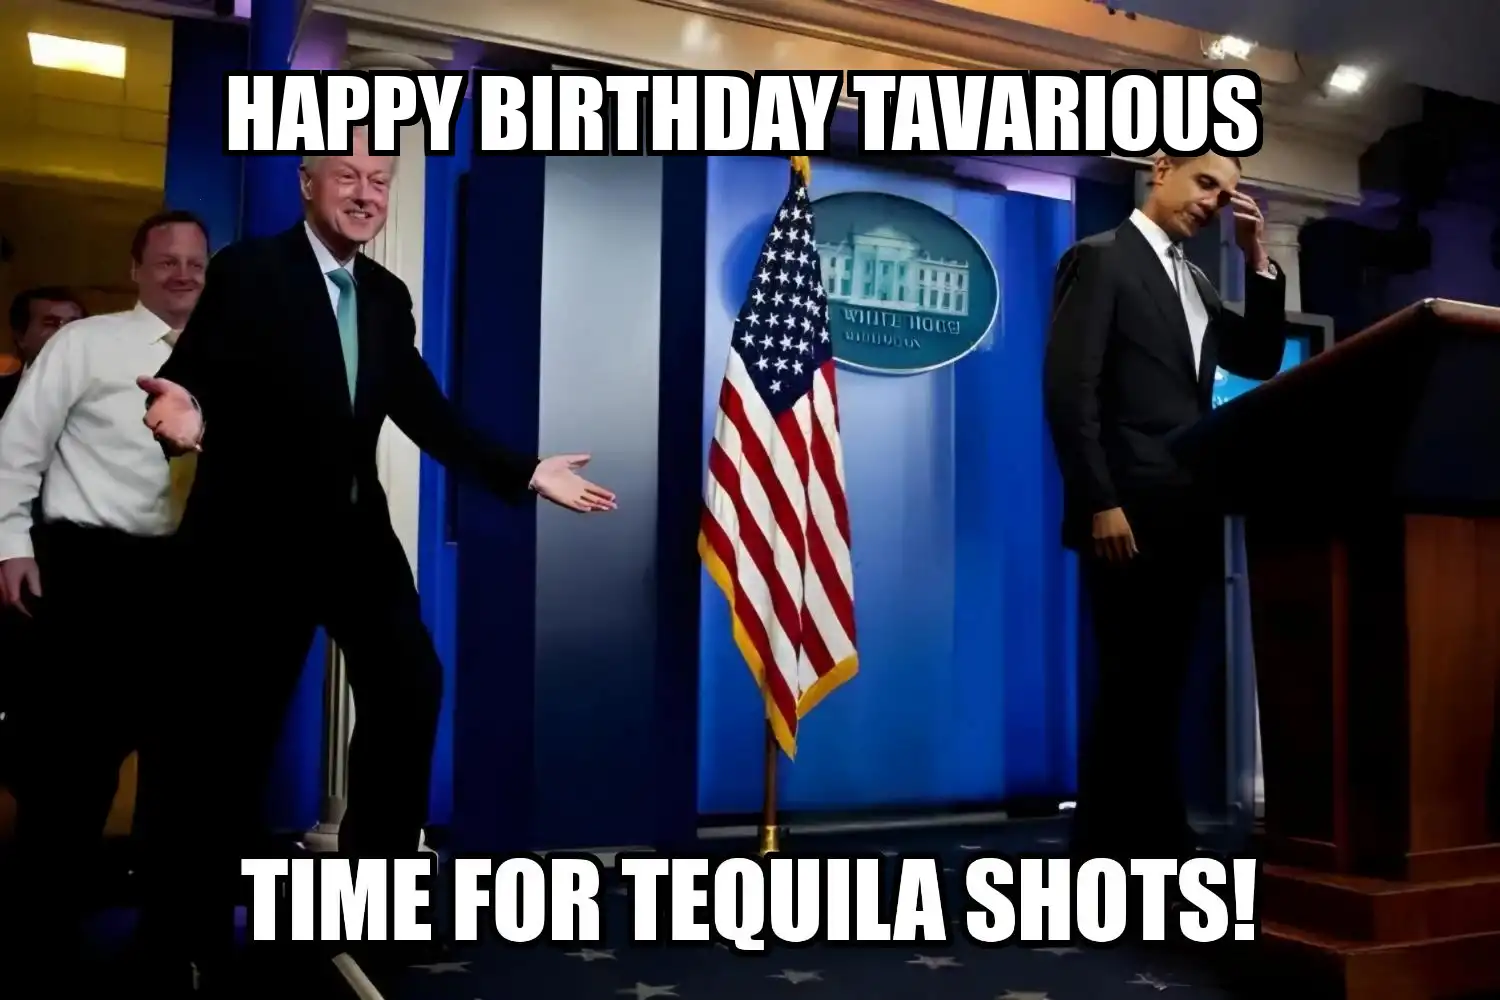 Happy Birthday Tavarious Time For Tequila Shots Memes